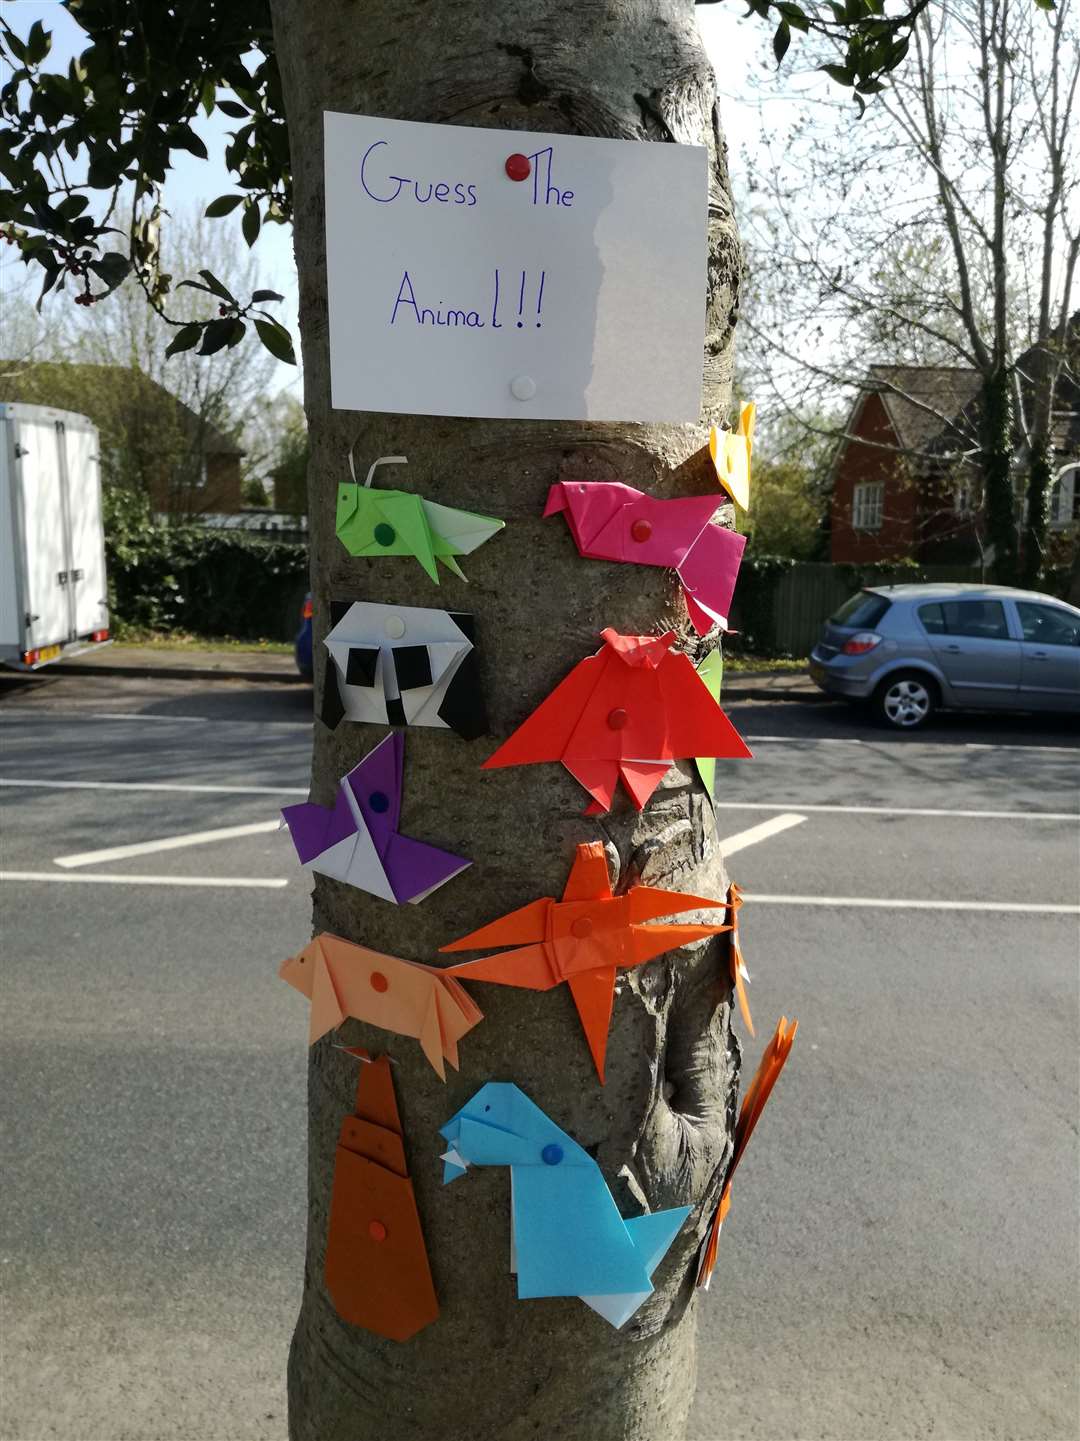 Yumi Knox, aged 11, learnt origami and then put this display up outside her house in Tonbridge